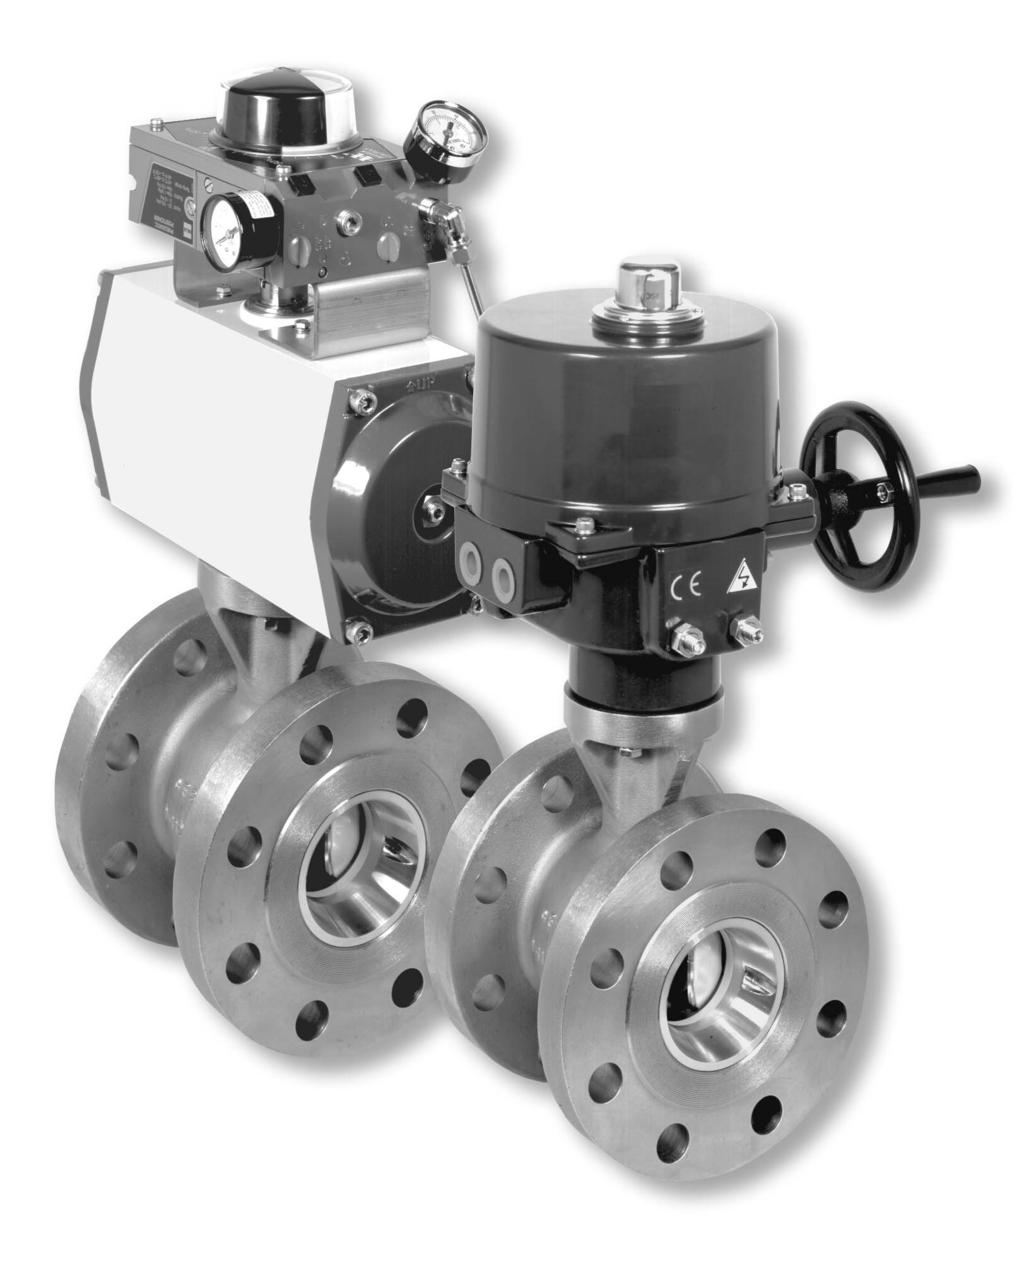 PRODUCT SPECIFICATION August 2005 PNEUMATIC AND ELECTRIC ACTUATED INDUSTRIAL VALVES SERIES: 3800 SIZES 1 to 8 INCHES E-Ball Rotary Control Valves High performance, reduced wear, eccentric plug rotary